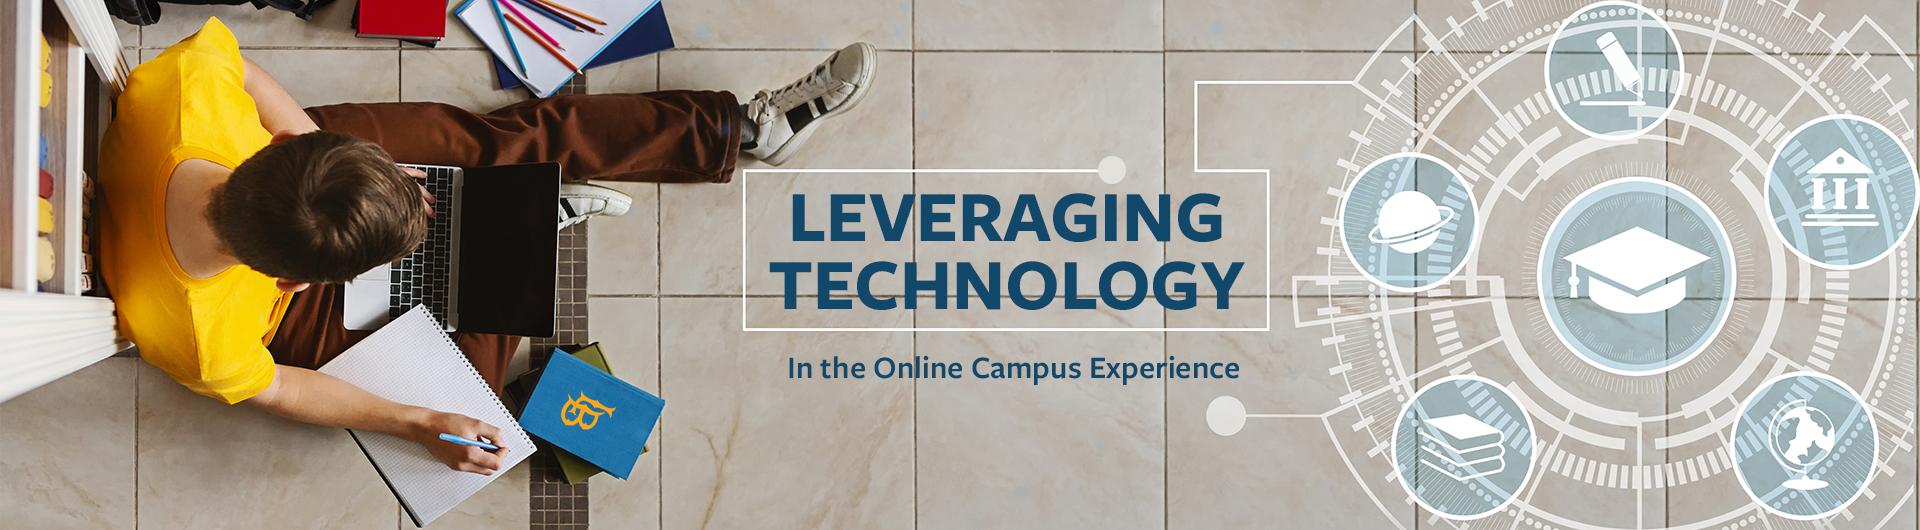 leveraging technology in the online campus experience